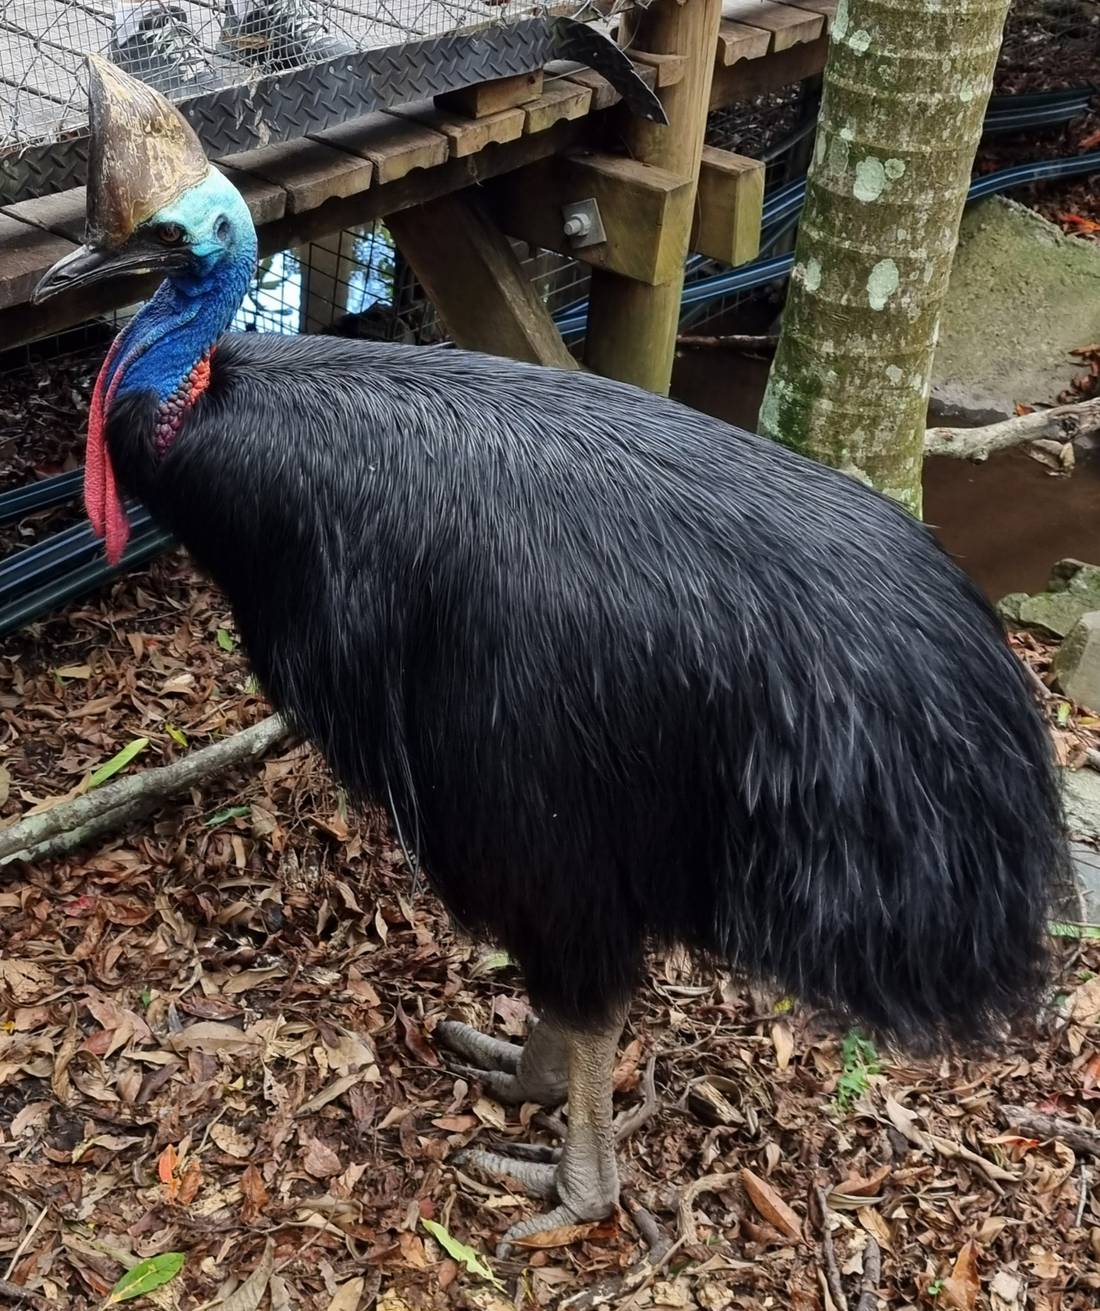 The Southern Cassowary from Far North Tropical Queensland.